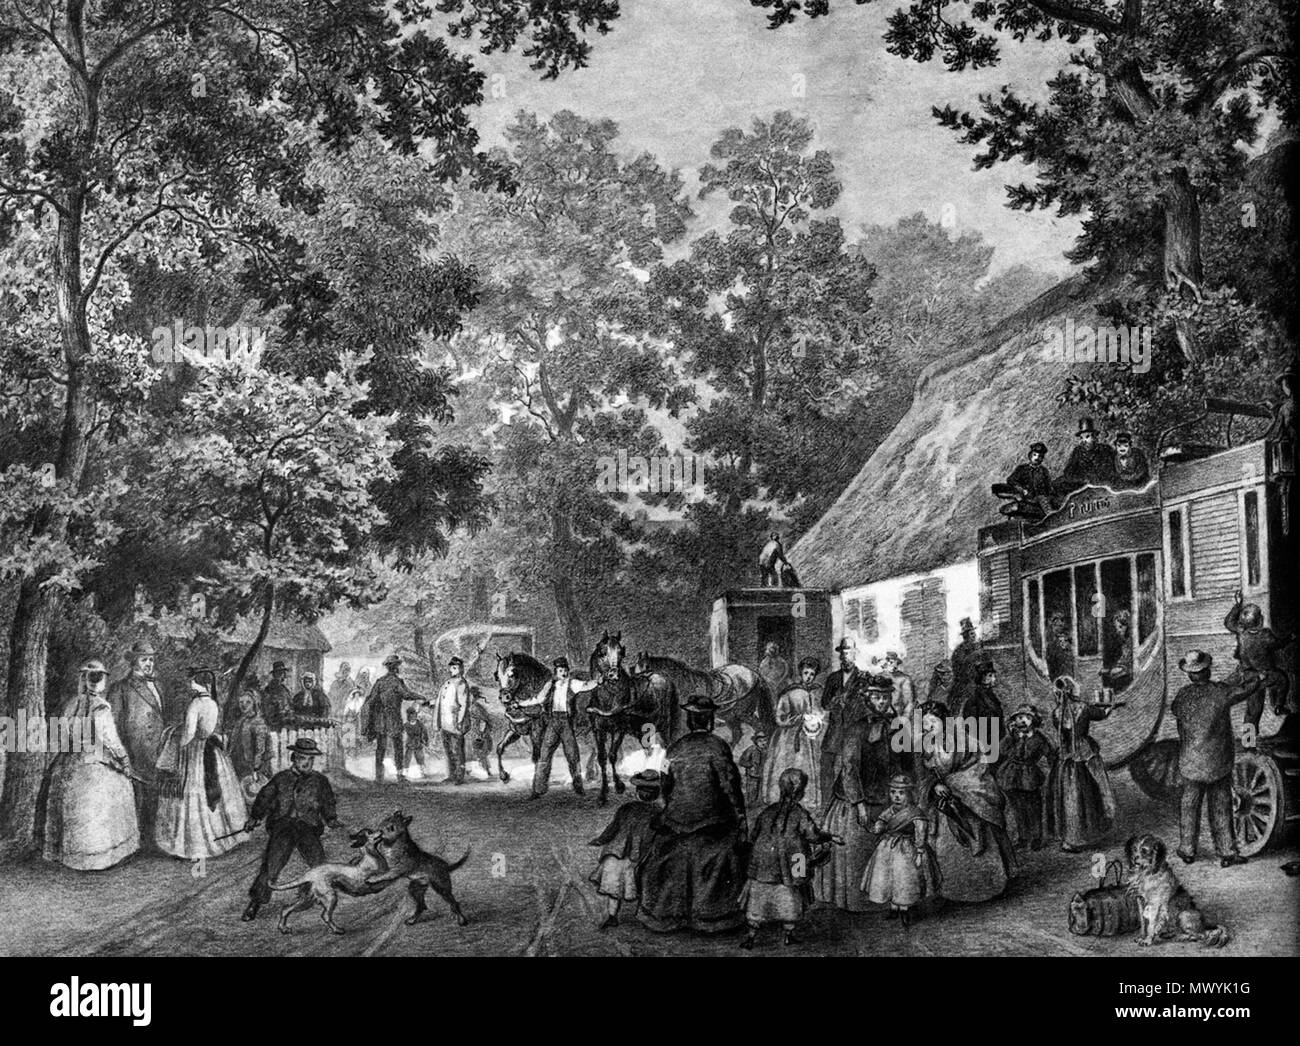 . English: The mail coach in Bremen-Oberneuland, Germany, at the Oberneulander Landstraße in front of the tavern Boschen (later Plate’s Café). Lithography by Johann Georg Walte (1811–1890) from the year 1860. Deutsch: Die Postkutsche in Bremen-Oberneuland an der Oberneulander Landstraße vor der Gaststätte Boschen (später Plate’s Café). Lithografie von Johann Georg Walte (1811–1890) aus dem Jahr 1860. 1860. Johann Georg Walte 499 Postkutsche in Oberneuland - Johann Georg Walte - 1860 Stock Photo